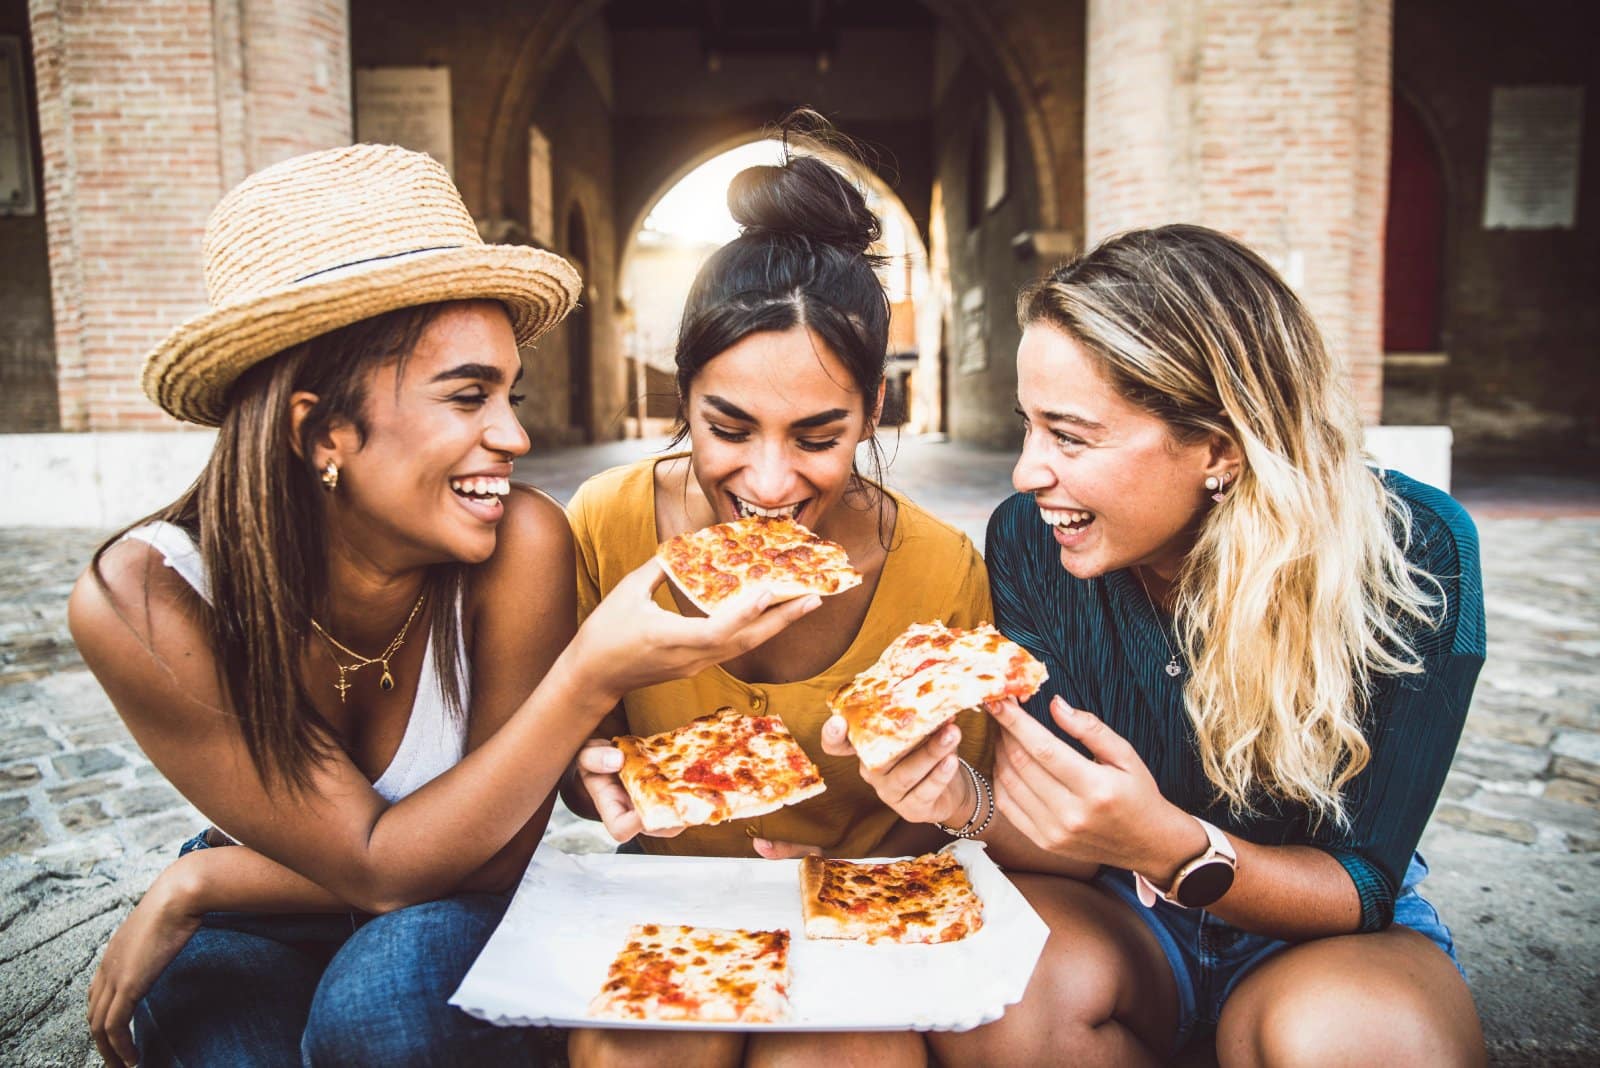 Image Credit: Shutterstock / DavideAngelini <p><span>The birthplace of pizza and pasta, Rome boasts a rich food culture. Try classic dishes like carbonara, cacio e pepe, and gelato.</span></p>